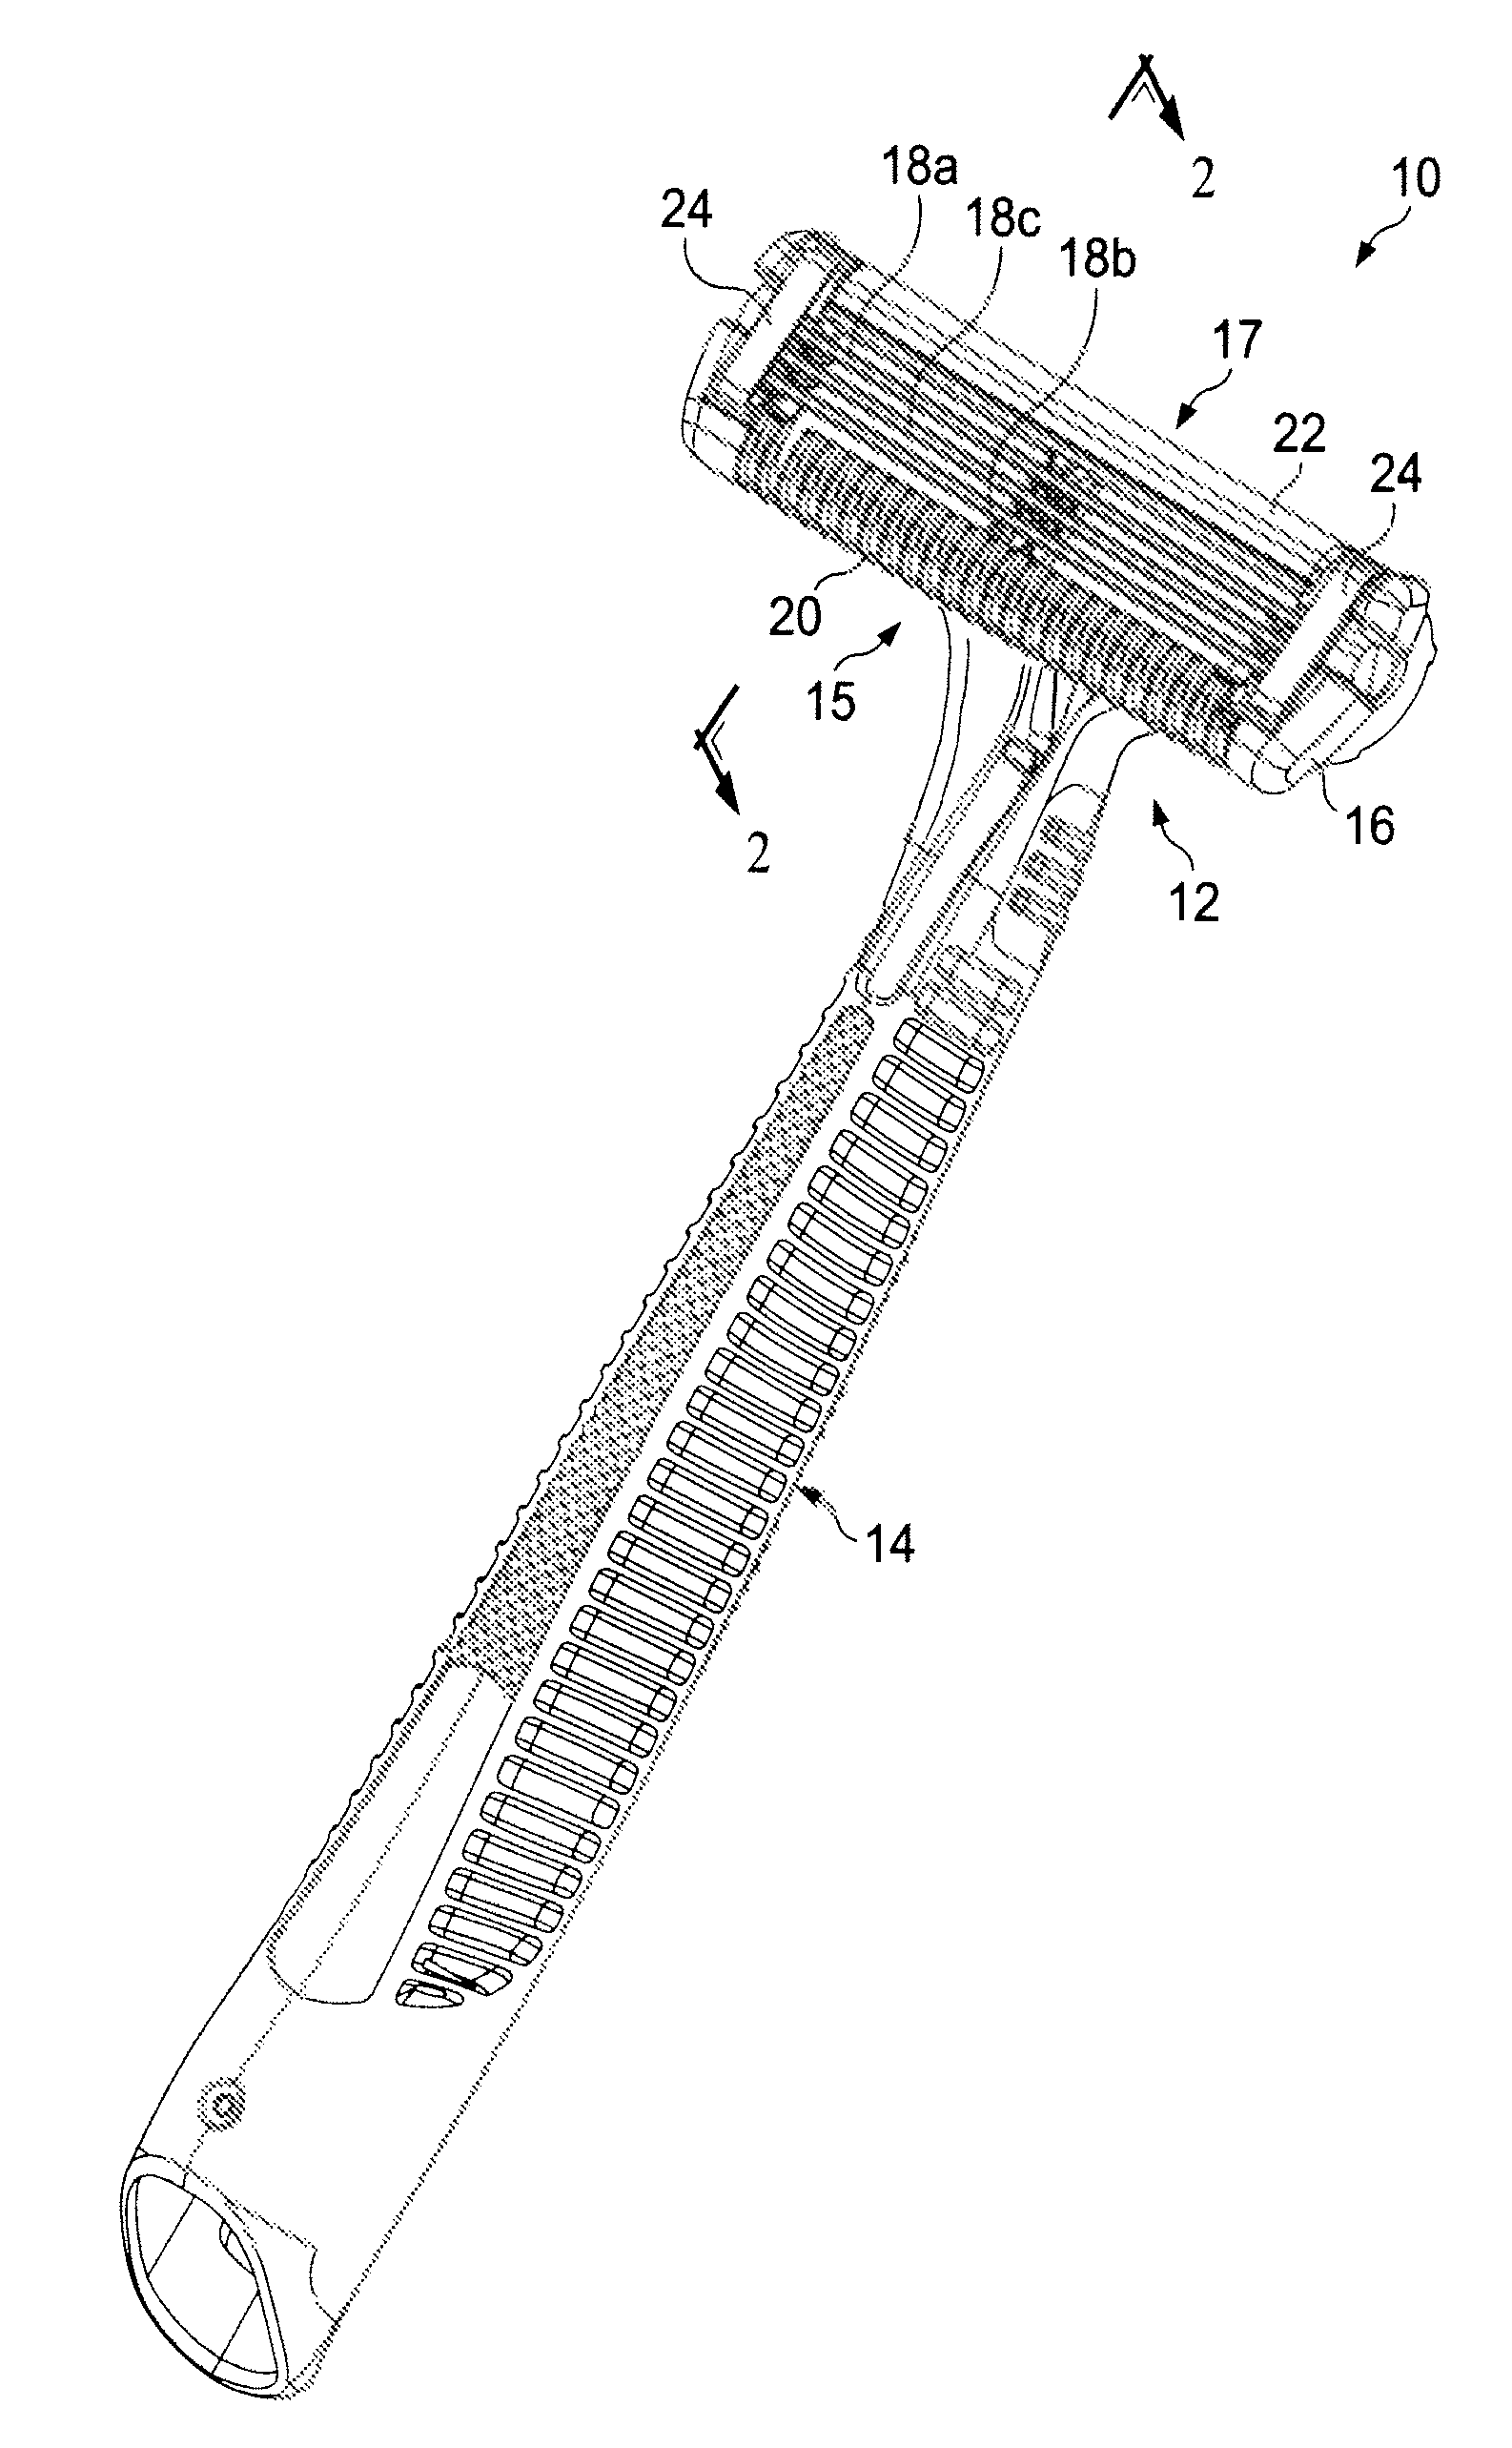 Shaving cartridge with supressed blade geometry